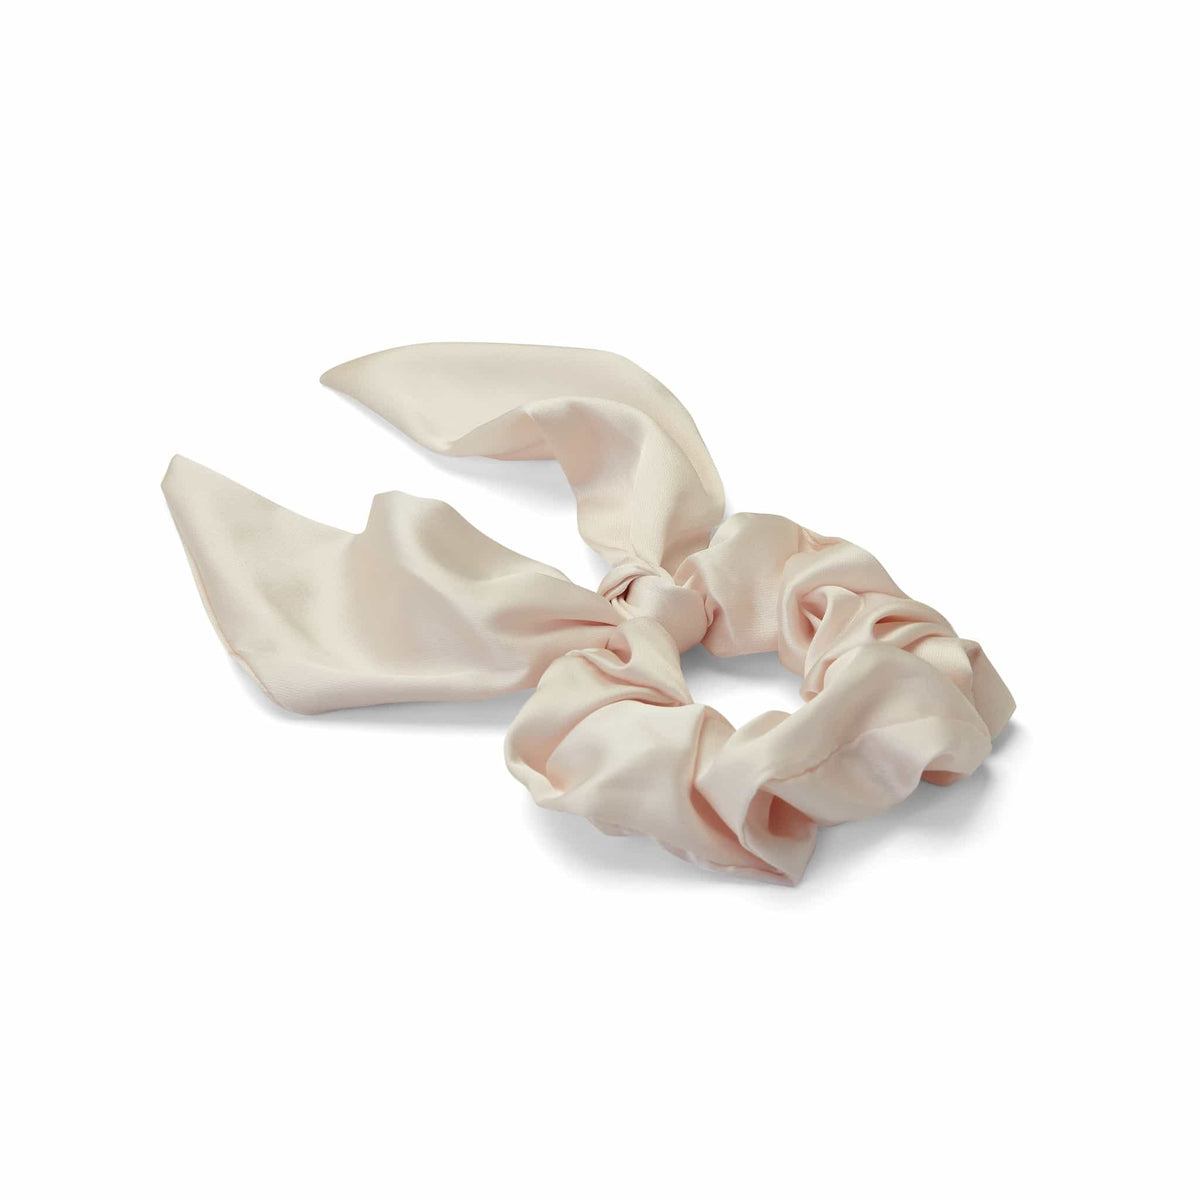 Only Curls Satin Scarf Scrunchie - Pink - Only Curls